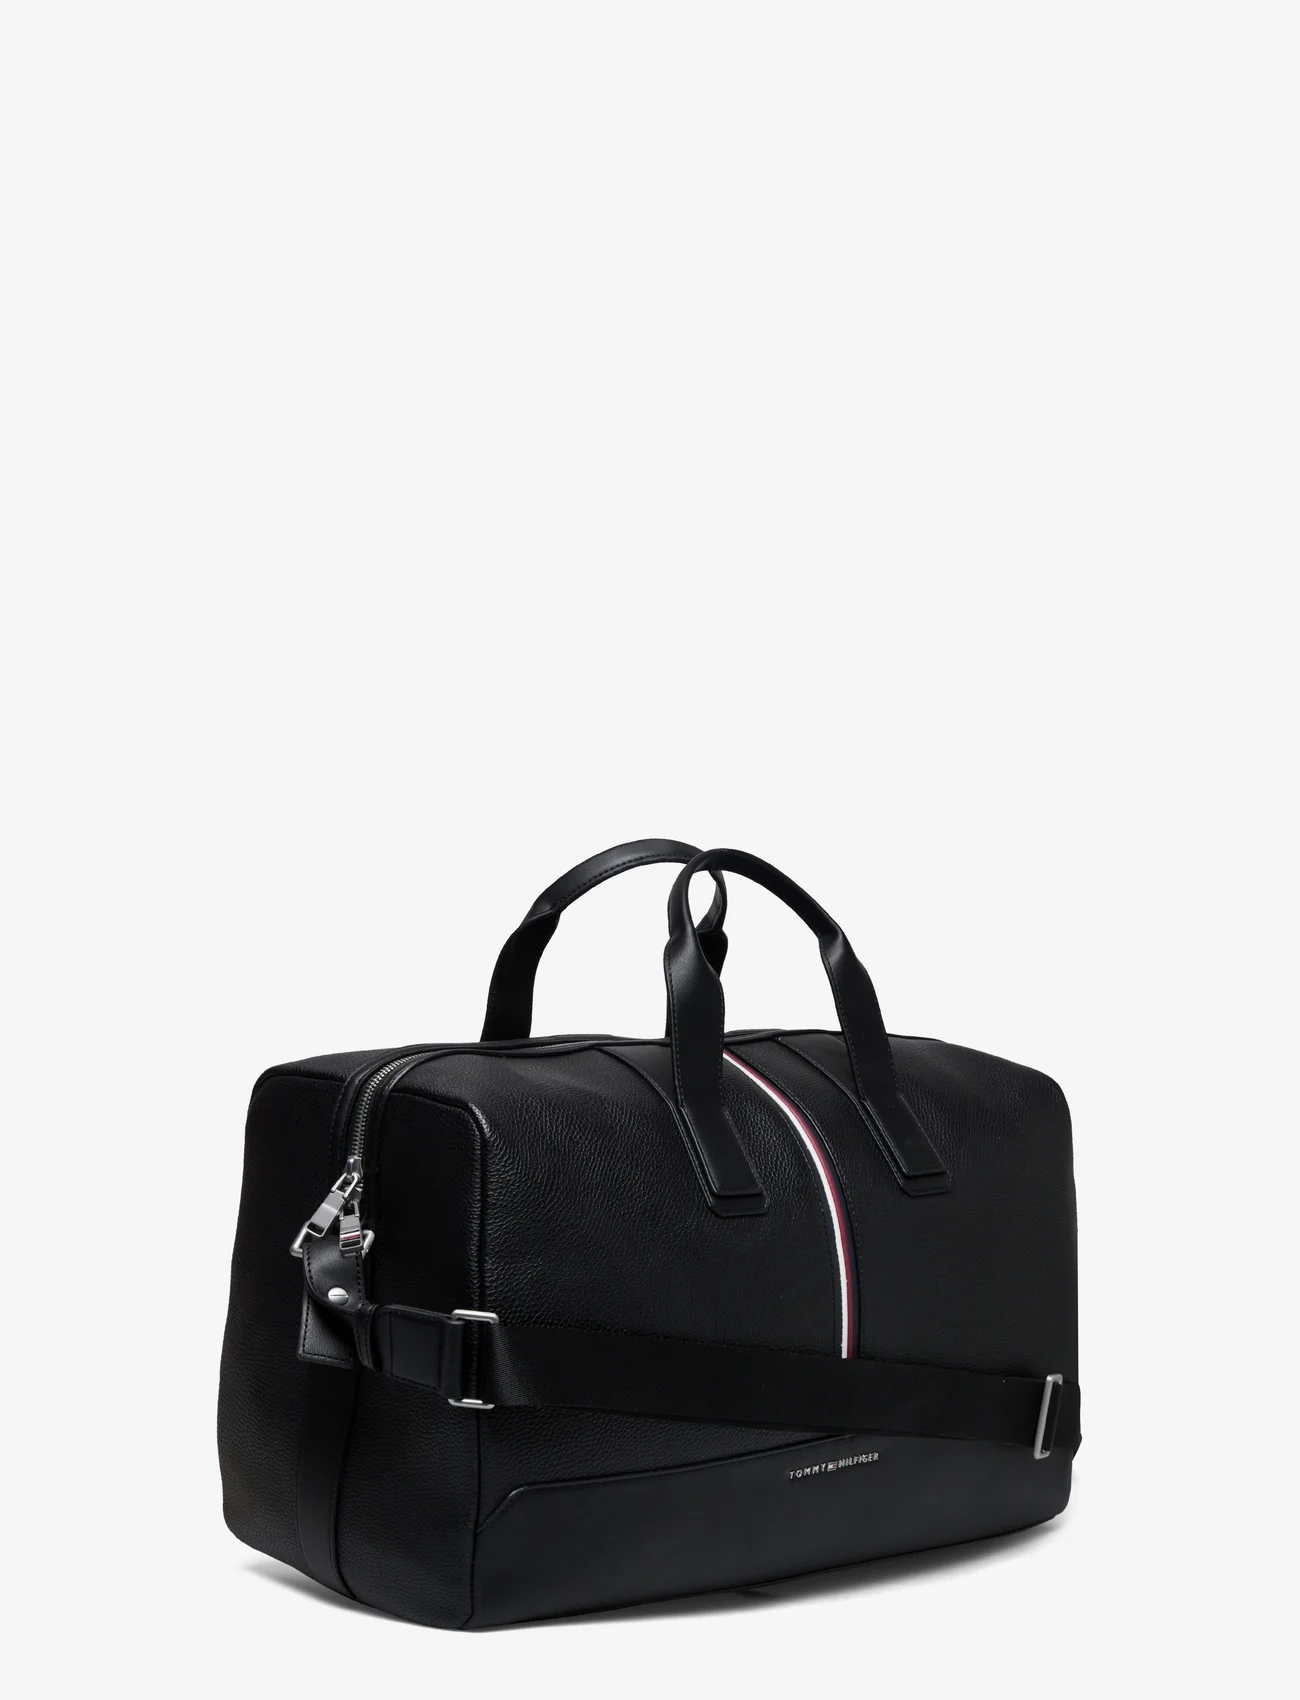 Tommy Hilfiger - TH CENTRAL DUFFLE - weekend bags - black - 1